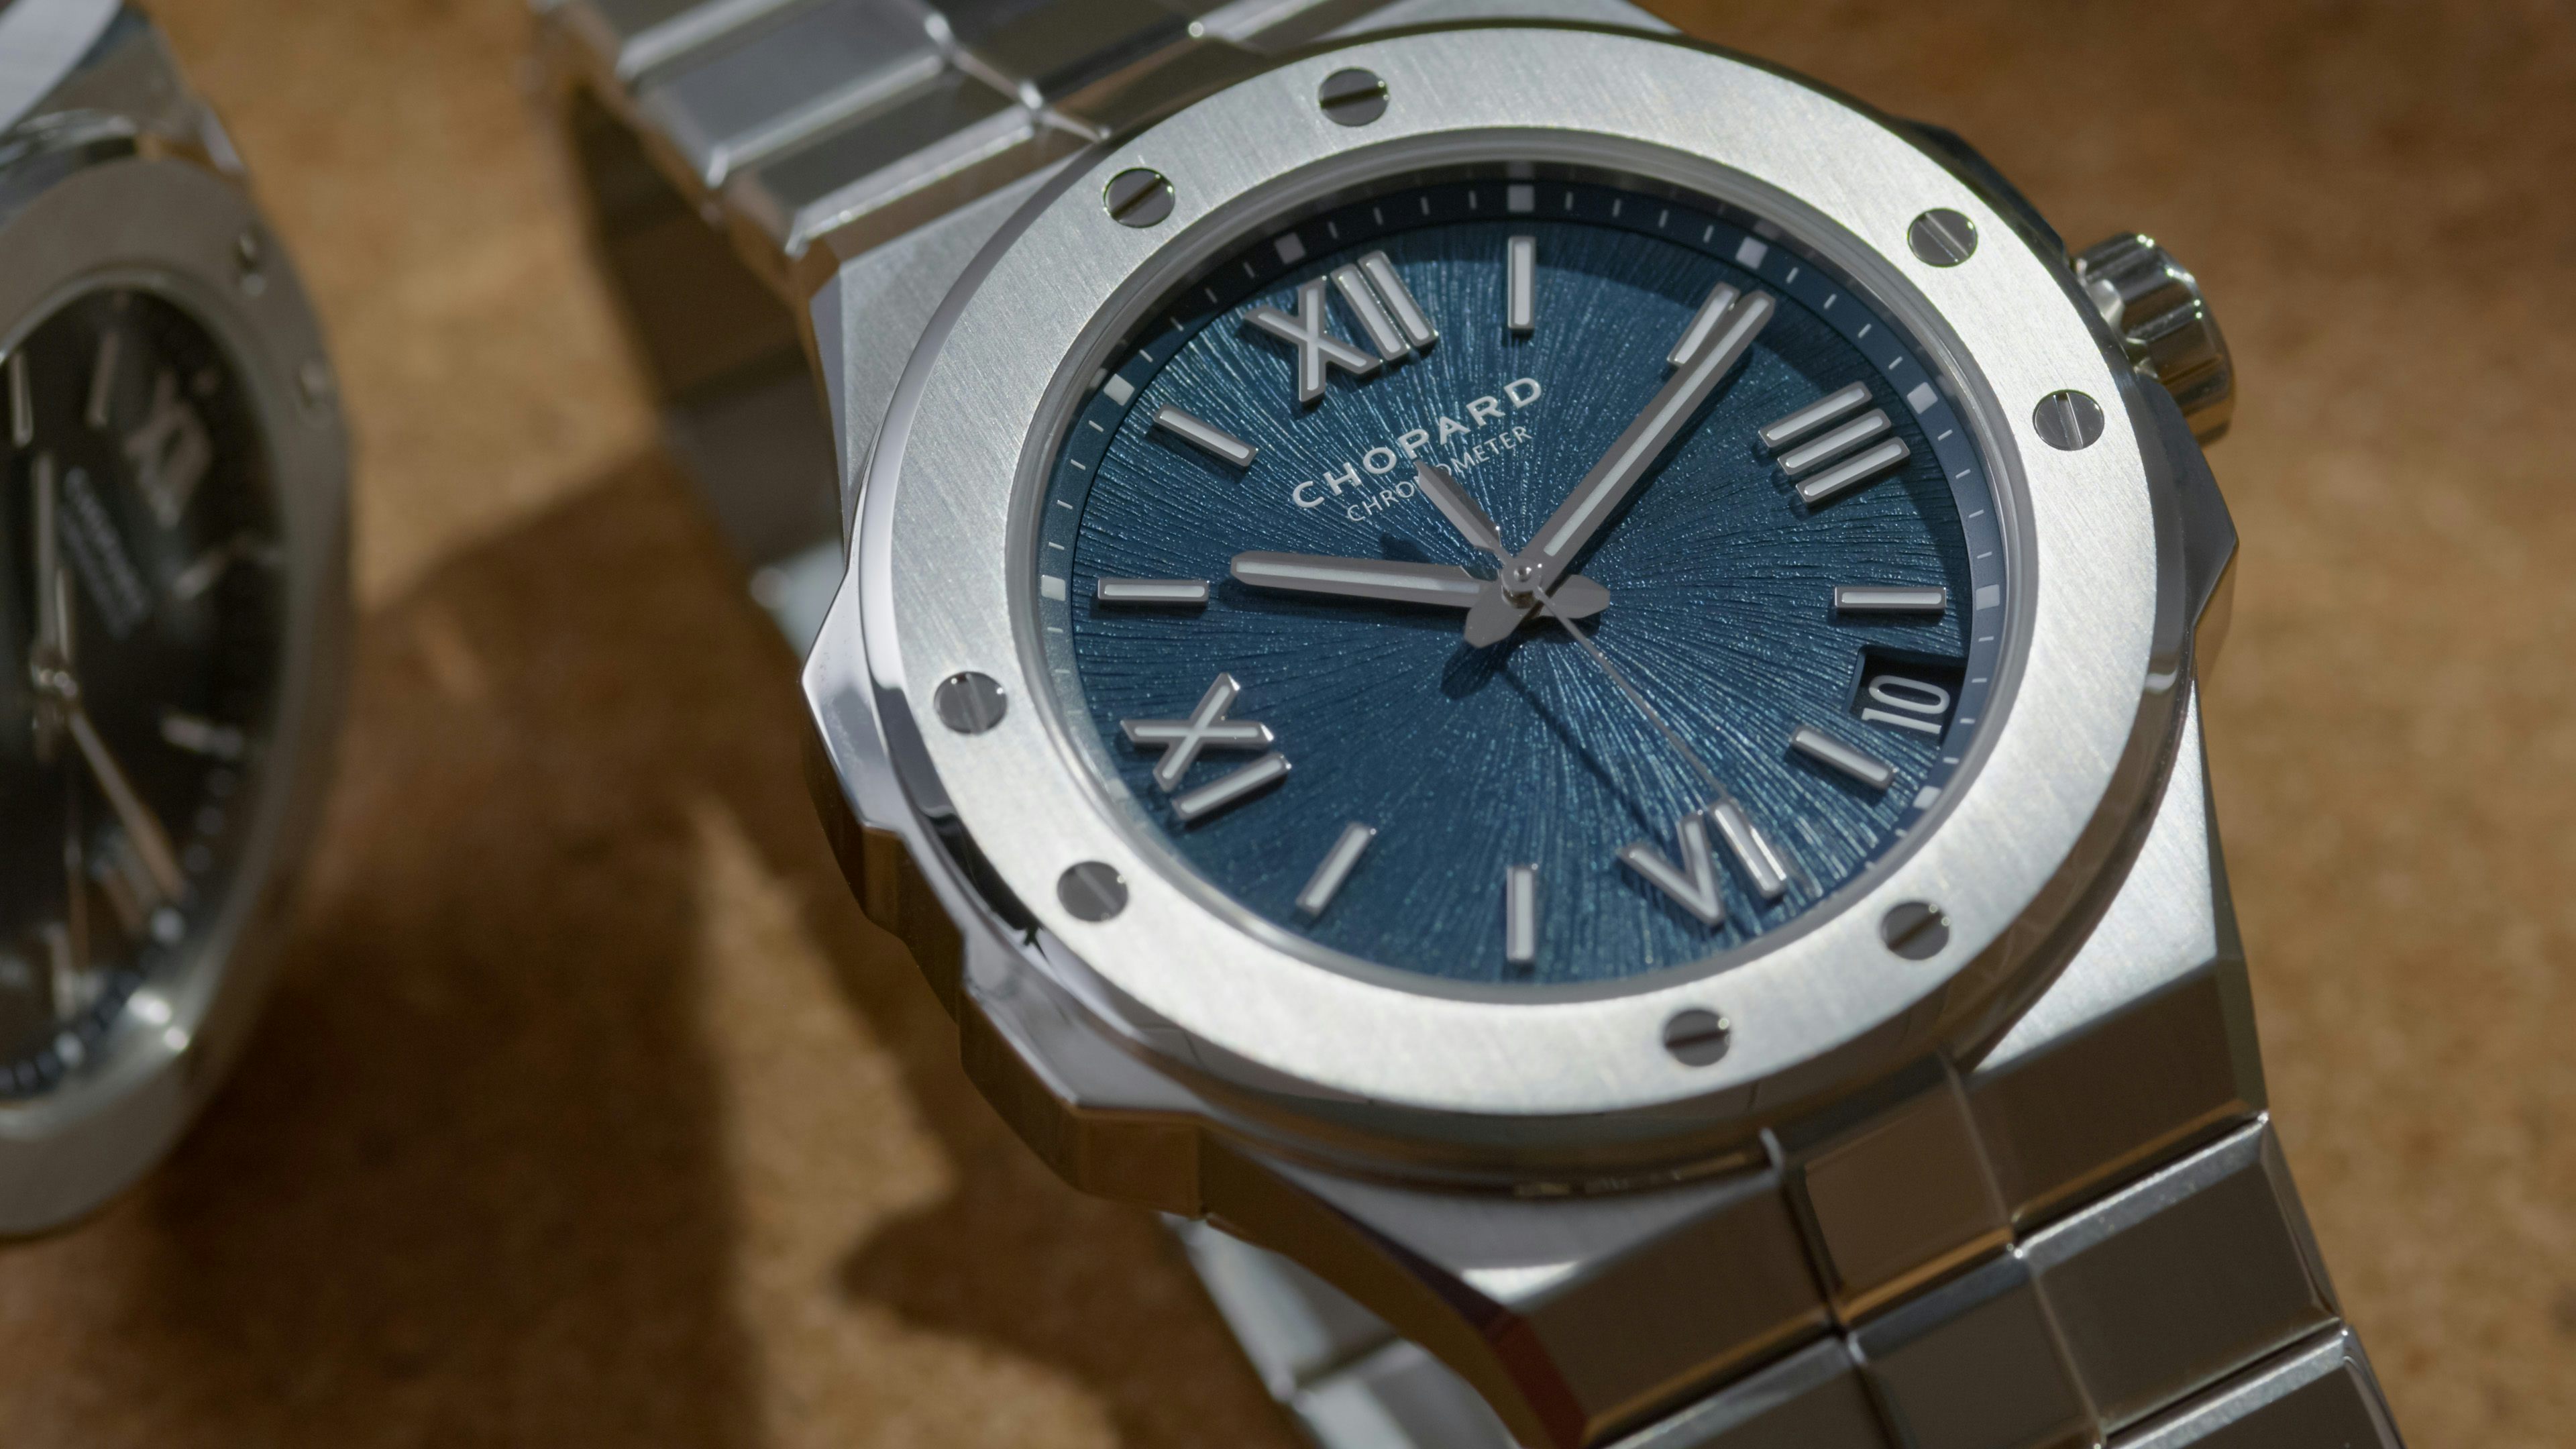 Chopard Alpine Eagle: A Cool – And Ethical – Sports Casual Watch